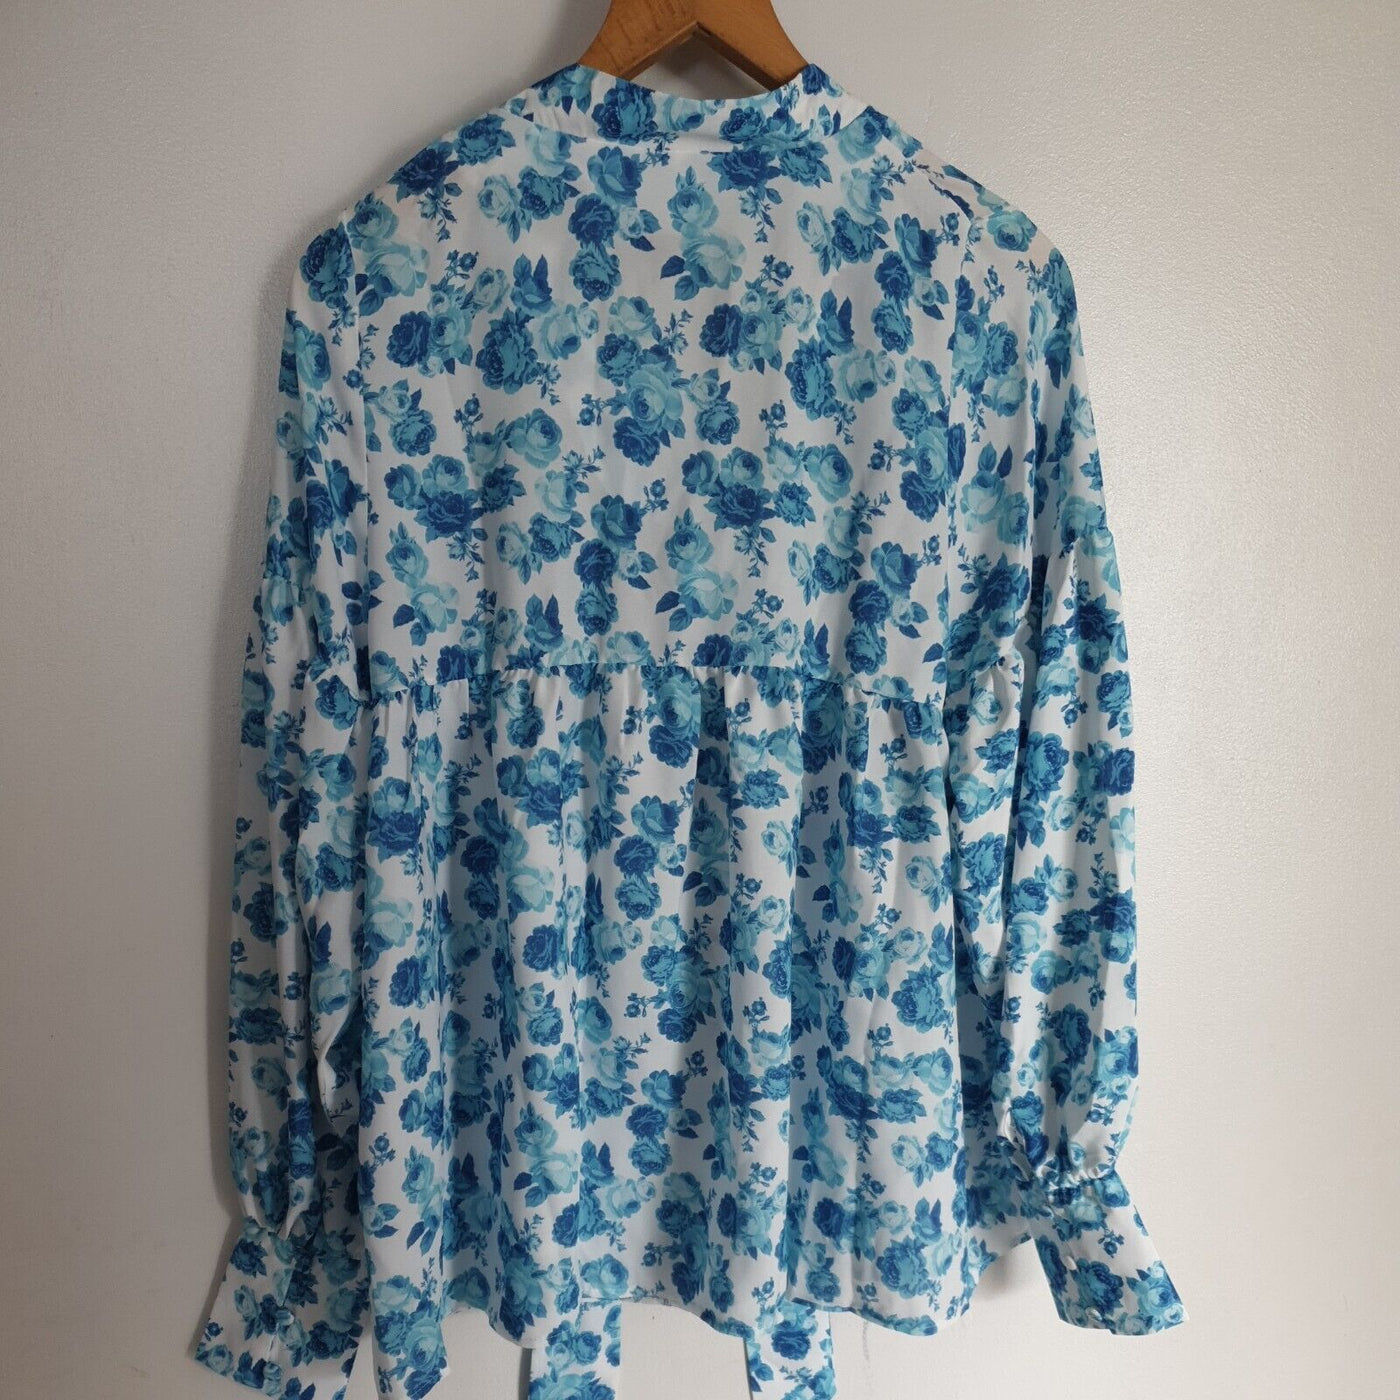 In The Style Lorna Luxe Blue Flo Blue Top Uk12****Ref V362